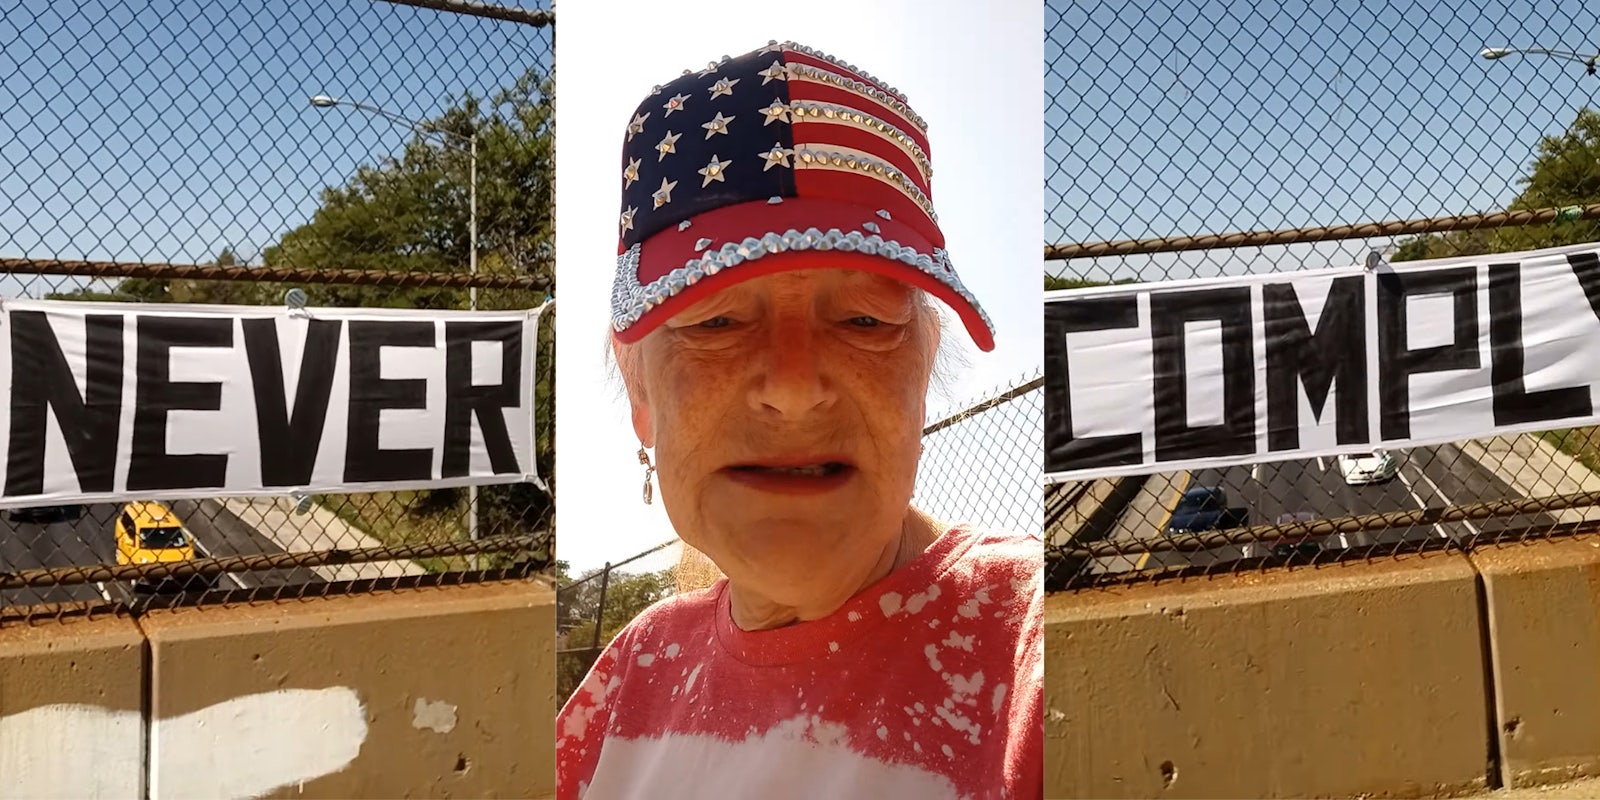 veronica wolski with american flag bedazzled hat (inset) NEVER COMPLY banner on interstate bridge